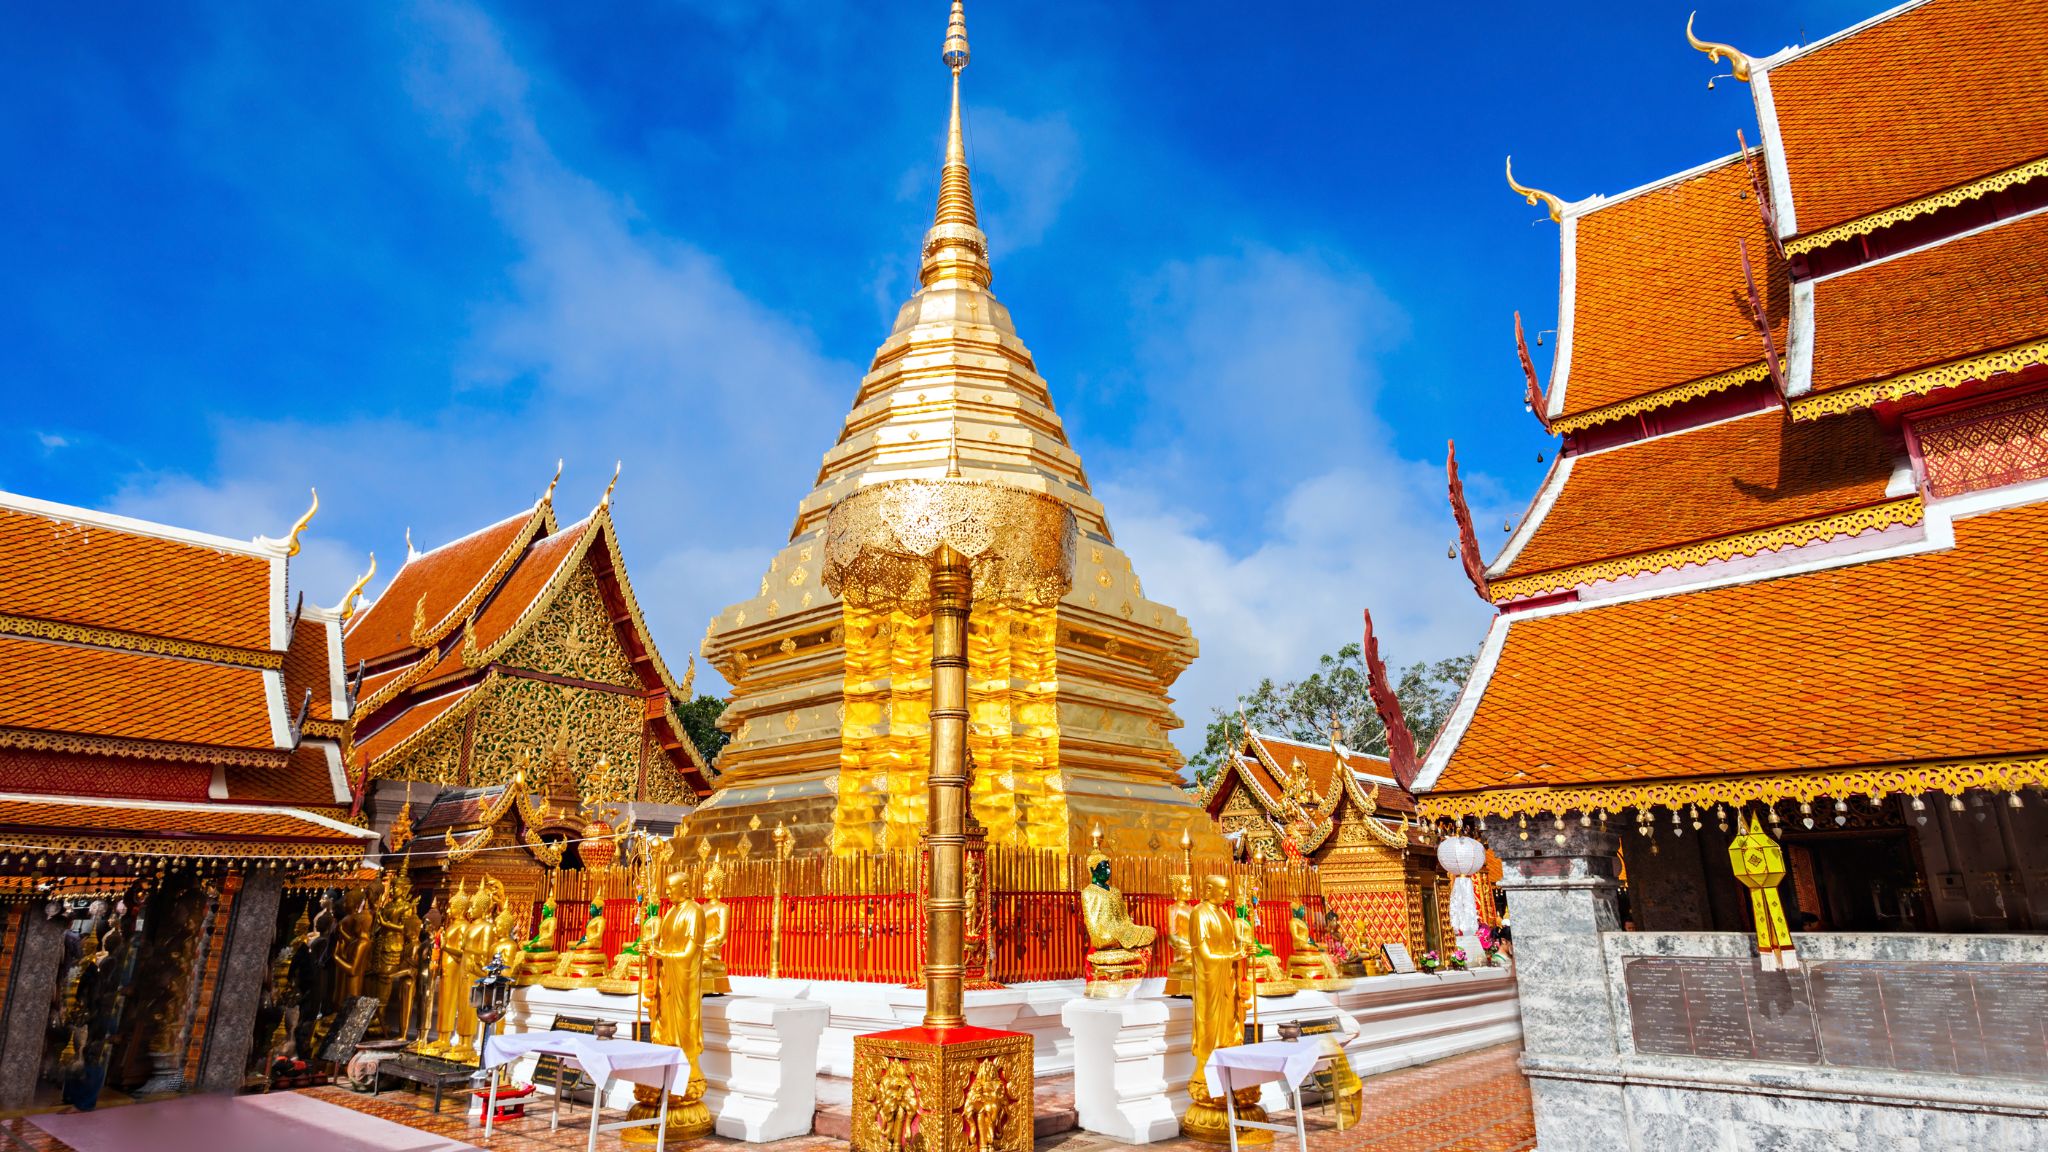 Day 7 Wat Phra That Doi Suthep Is The Most Renowned Temple In Chiang Mai